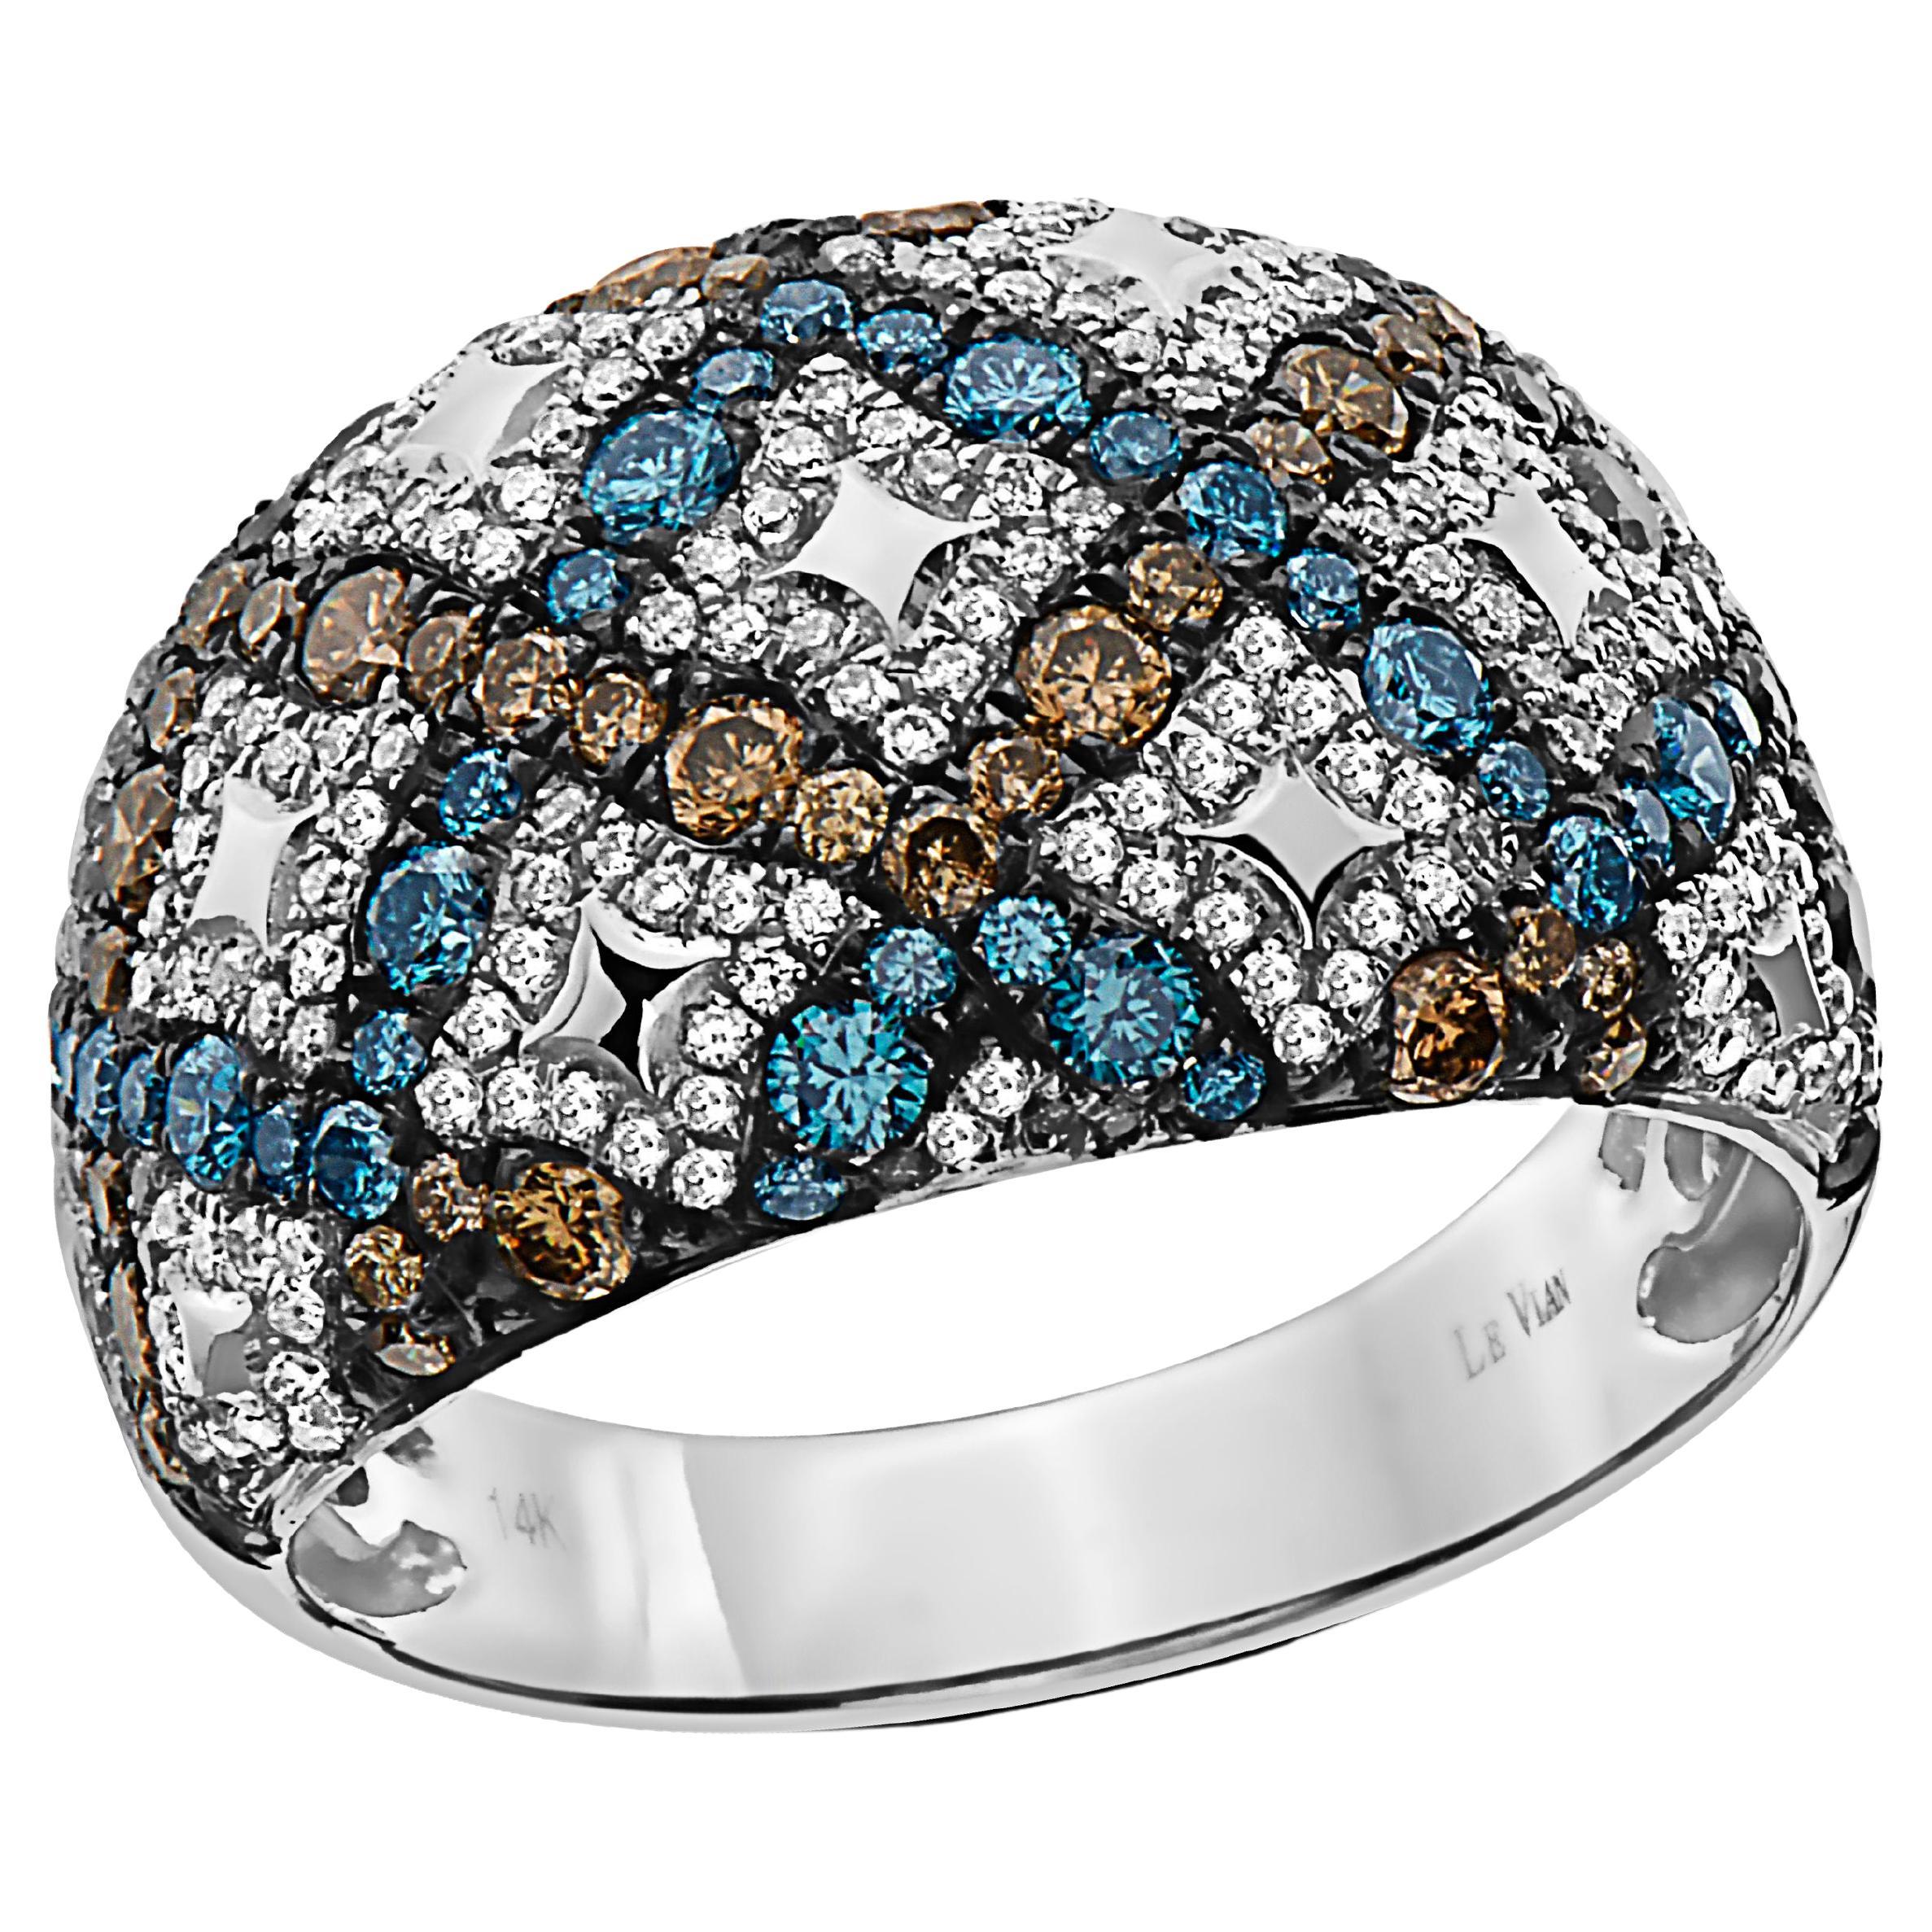 LeVian Ring Blue, Chocolate, and White Diamonds, Set in 14K White Gold For Sale